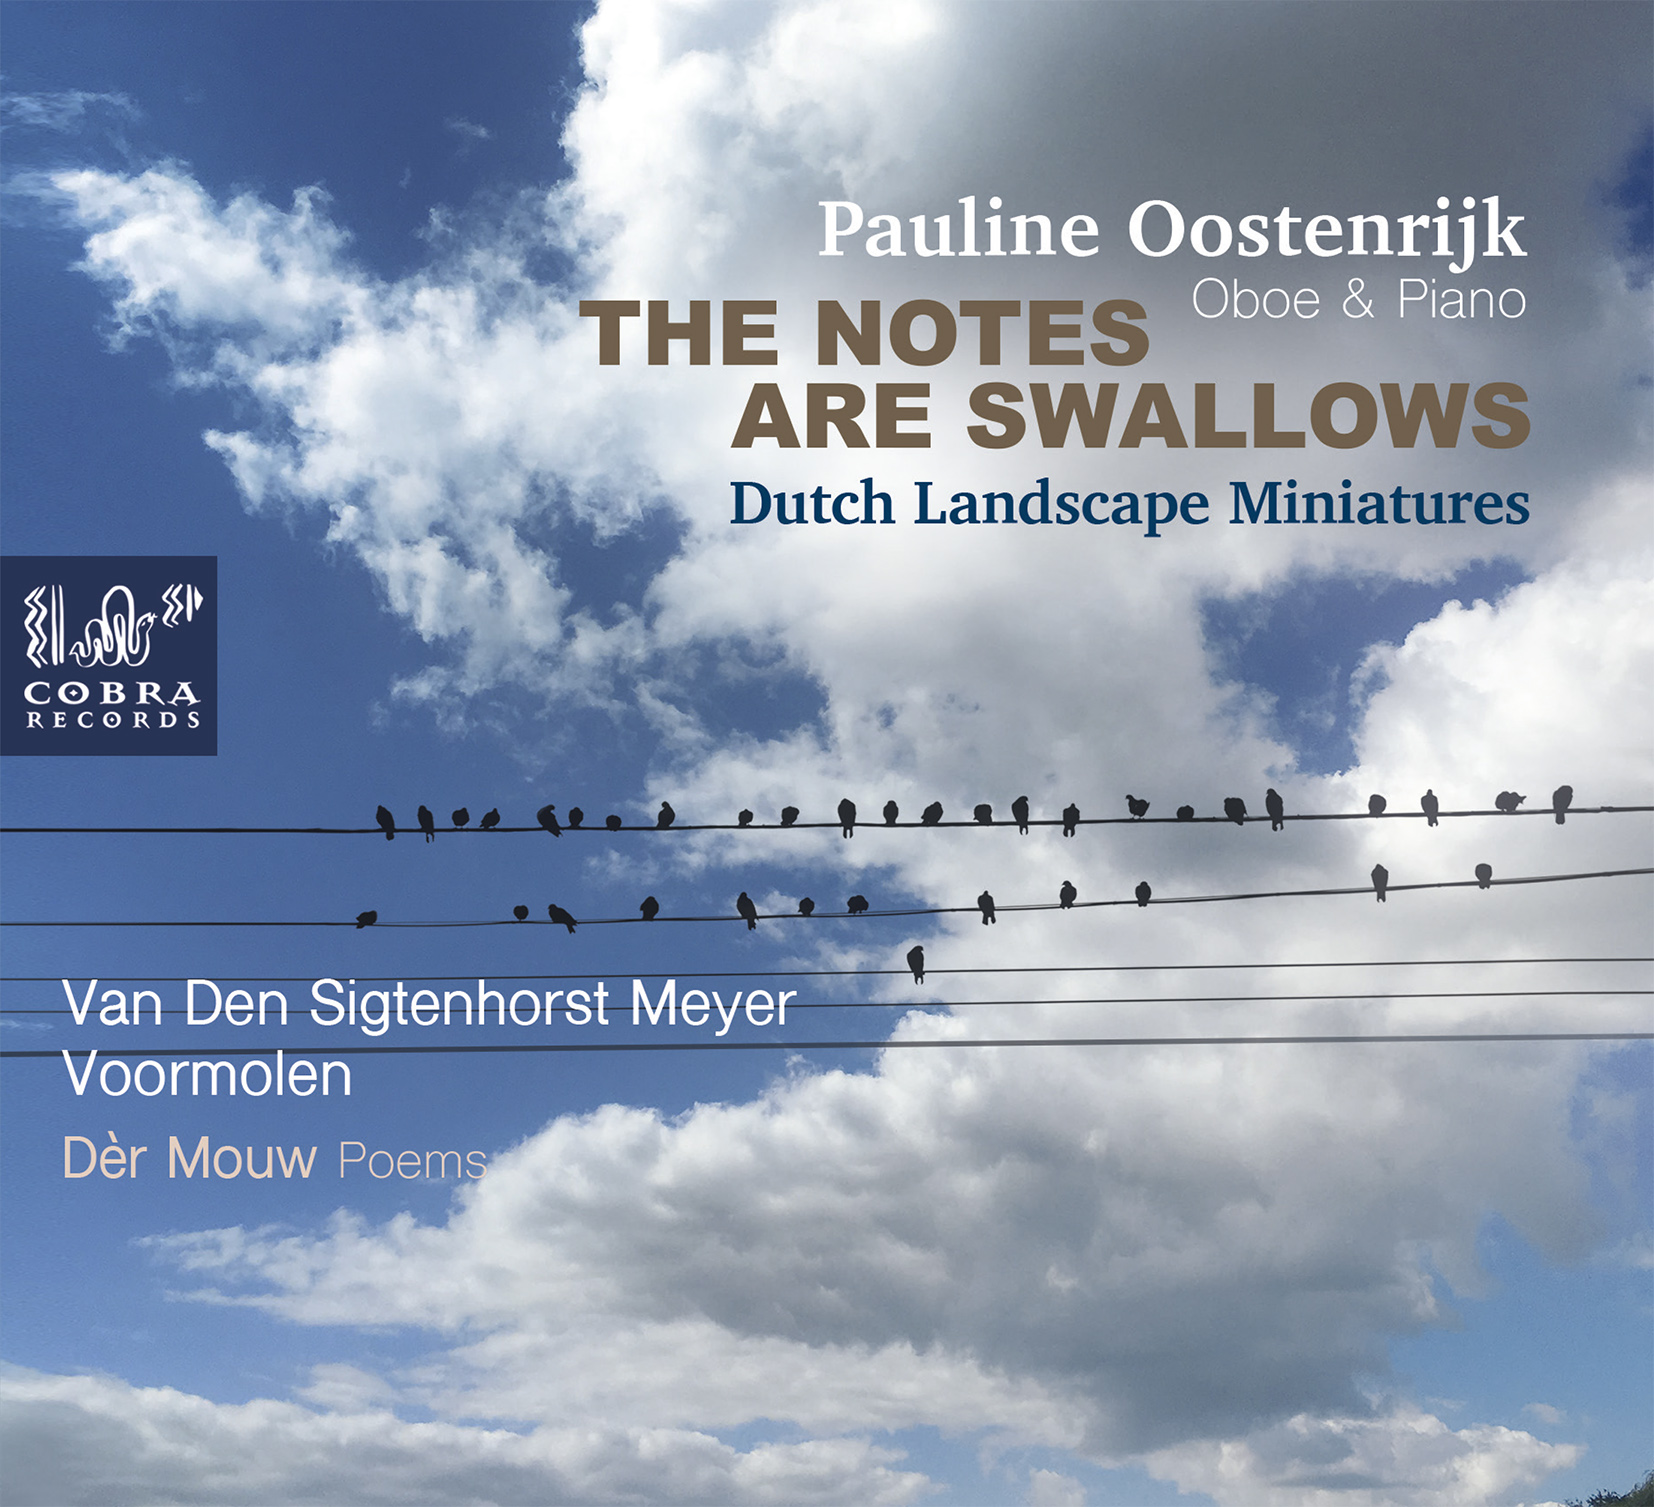 Pauline Oostenrijk — “The Notes Are Swallows” (Cobra Records, 2020)